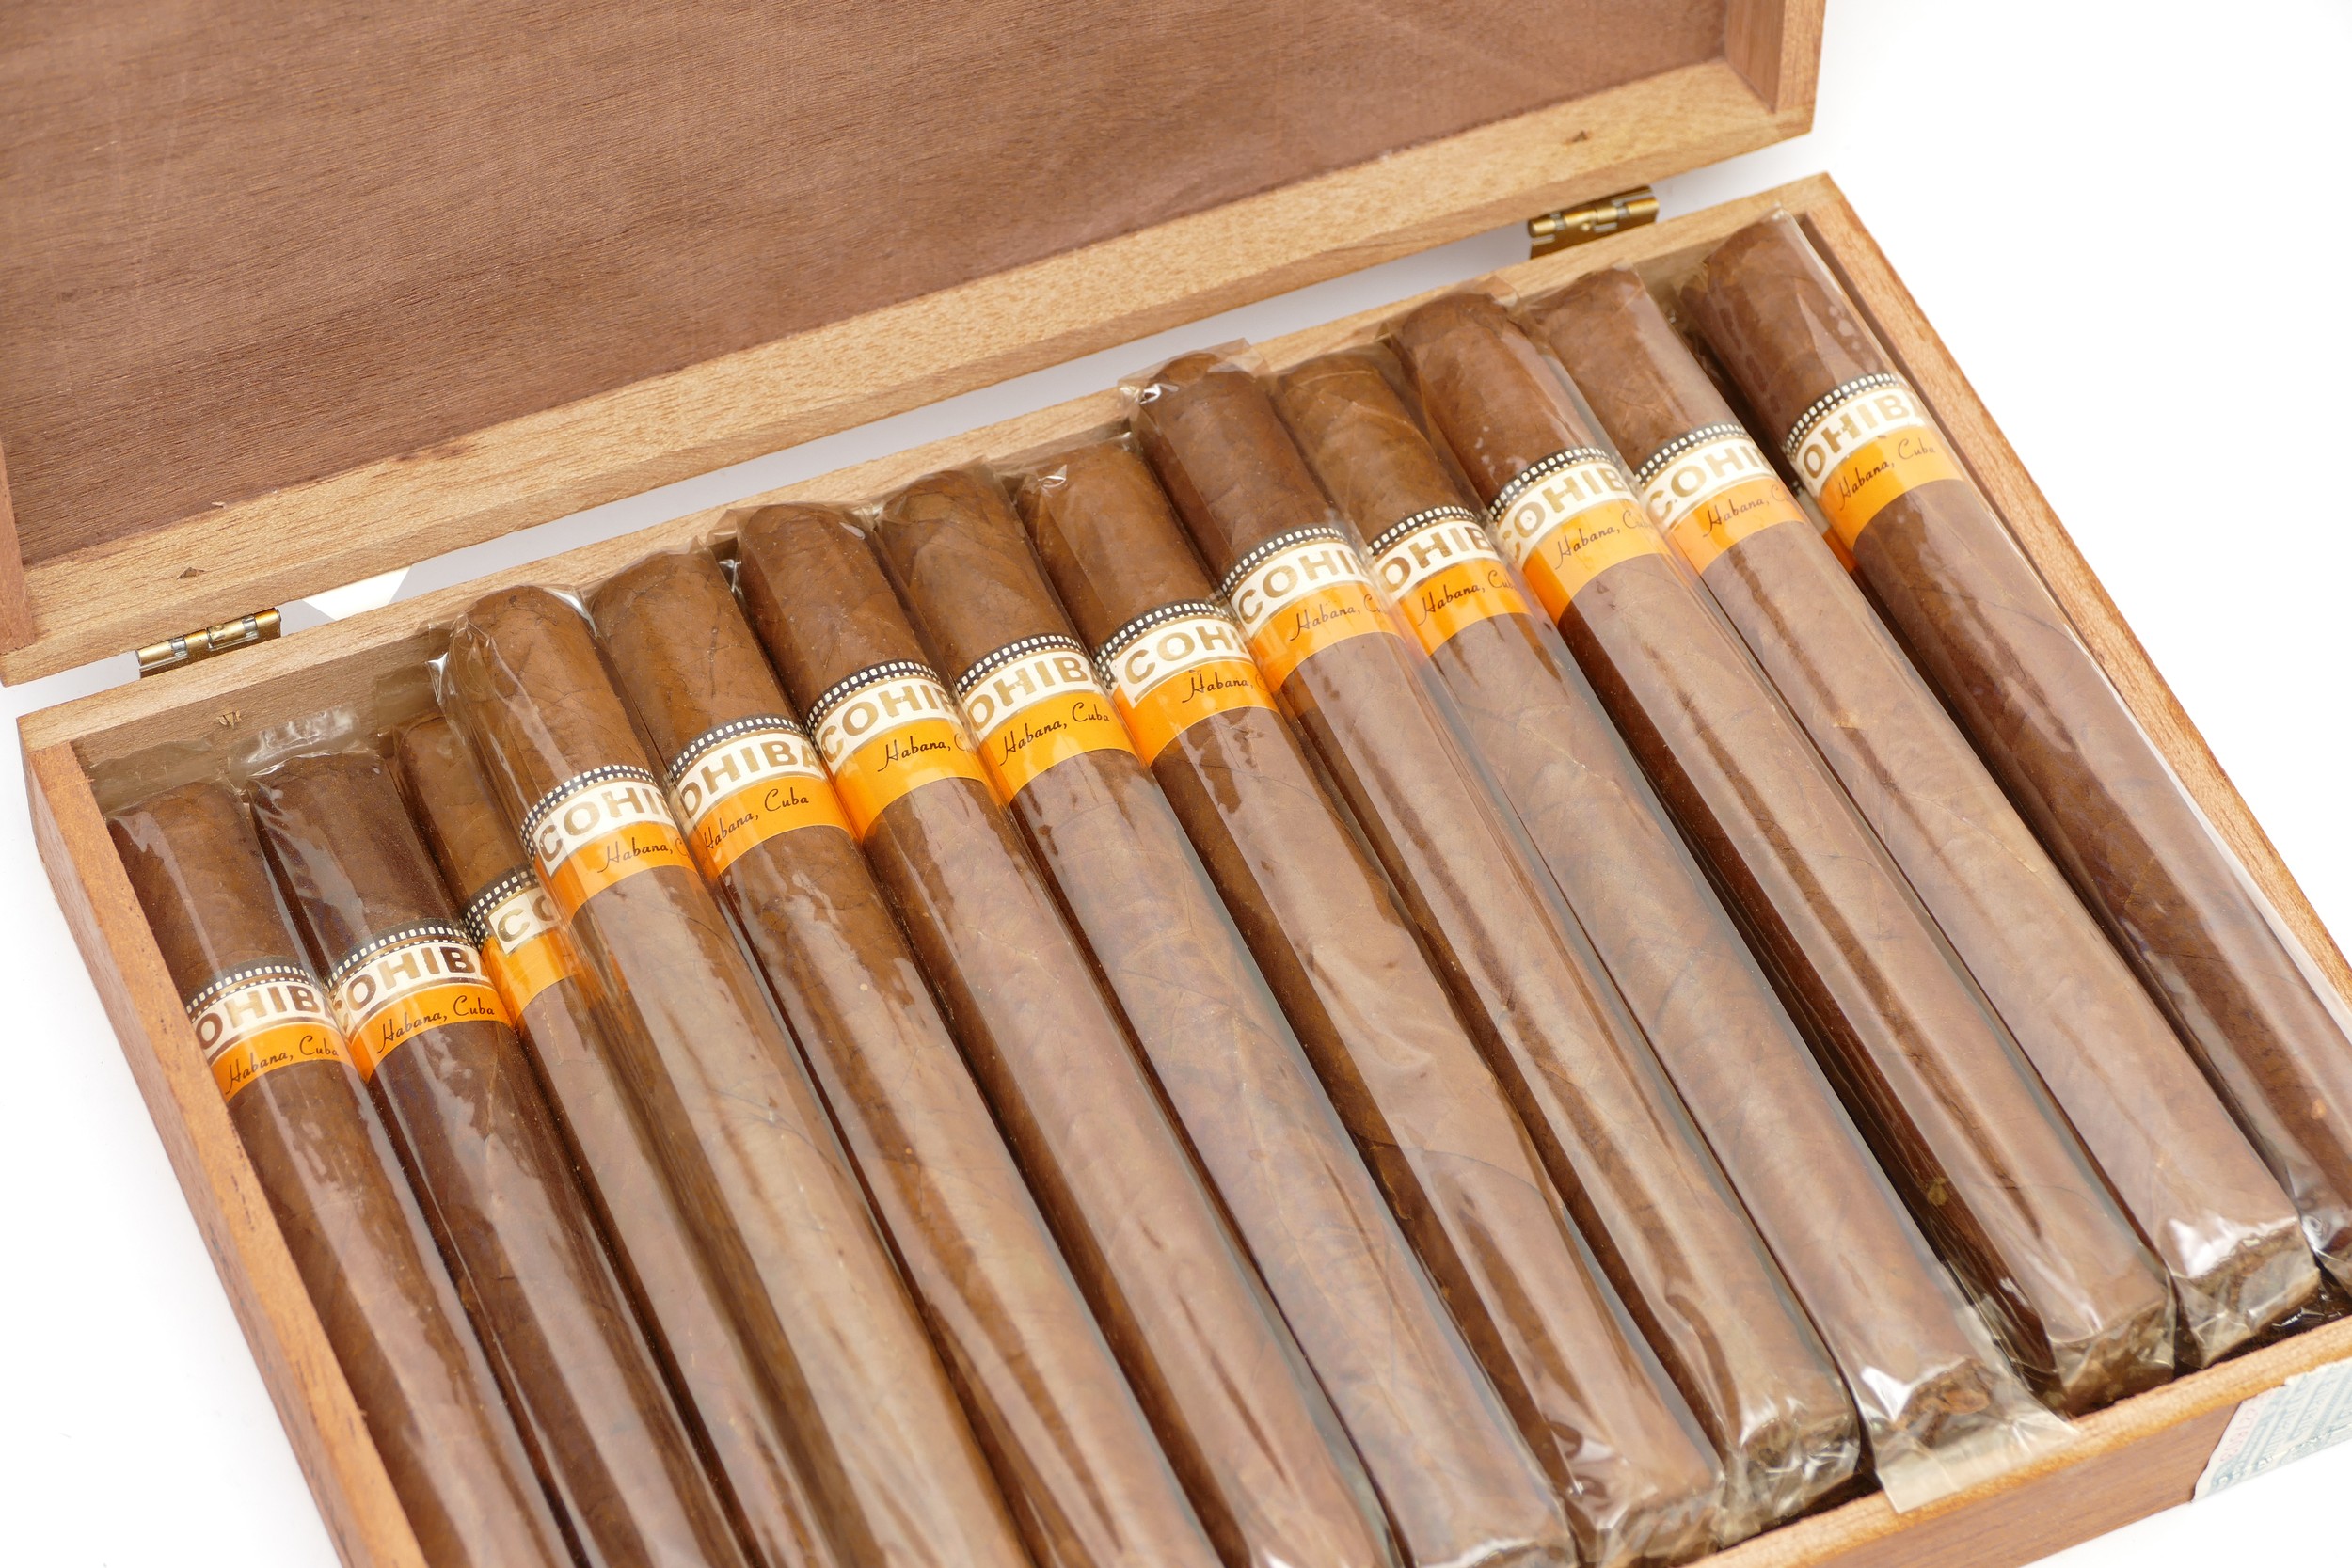 *** WITHDRAWN FROM AUCTION *** Cohiba, twenty three cigars in a wooden case, serial number AE227603 - Image 2 of 4